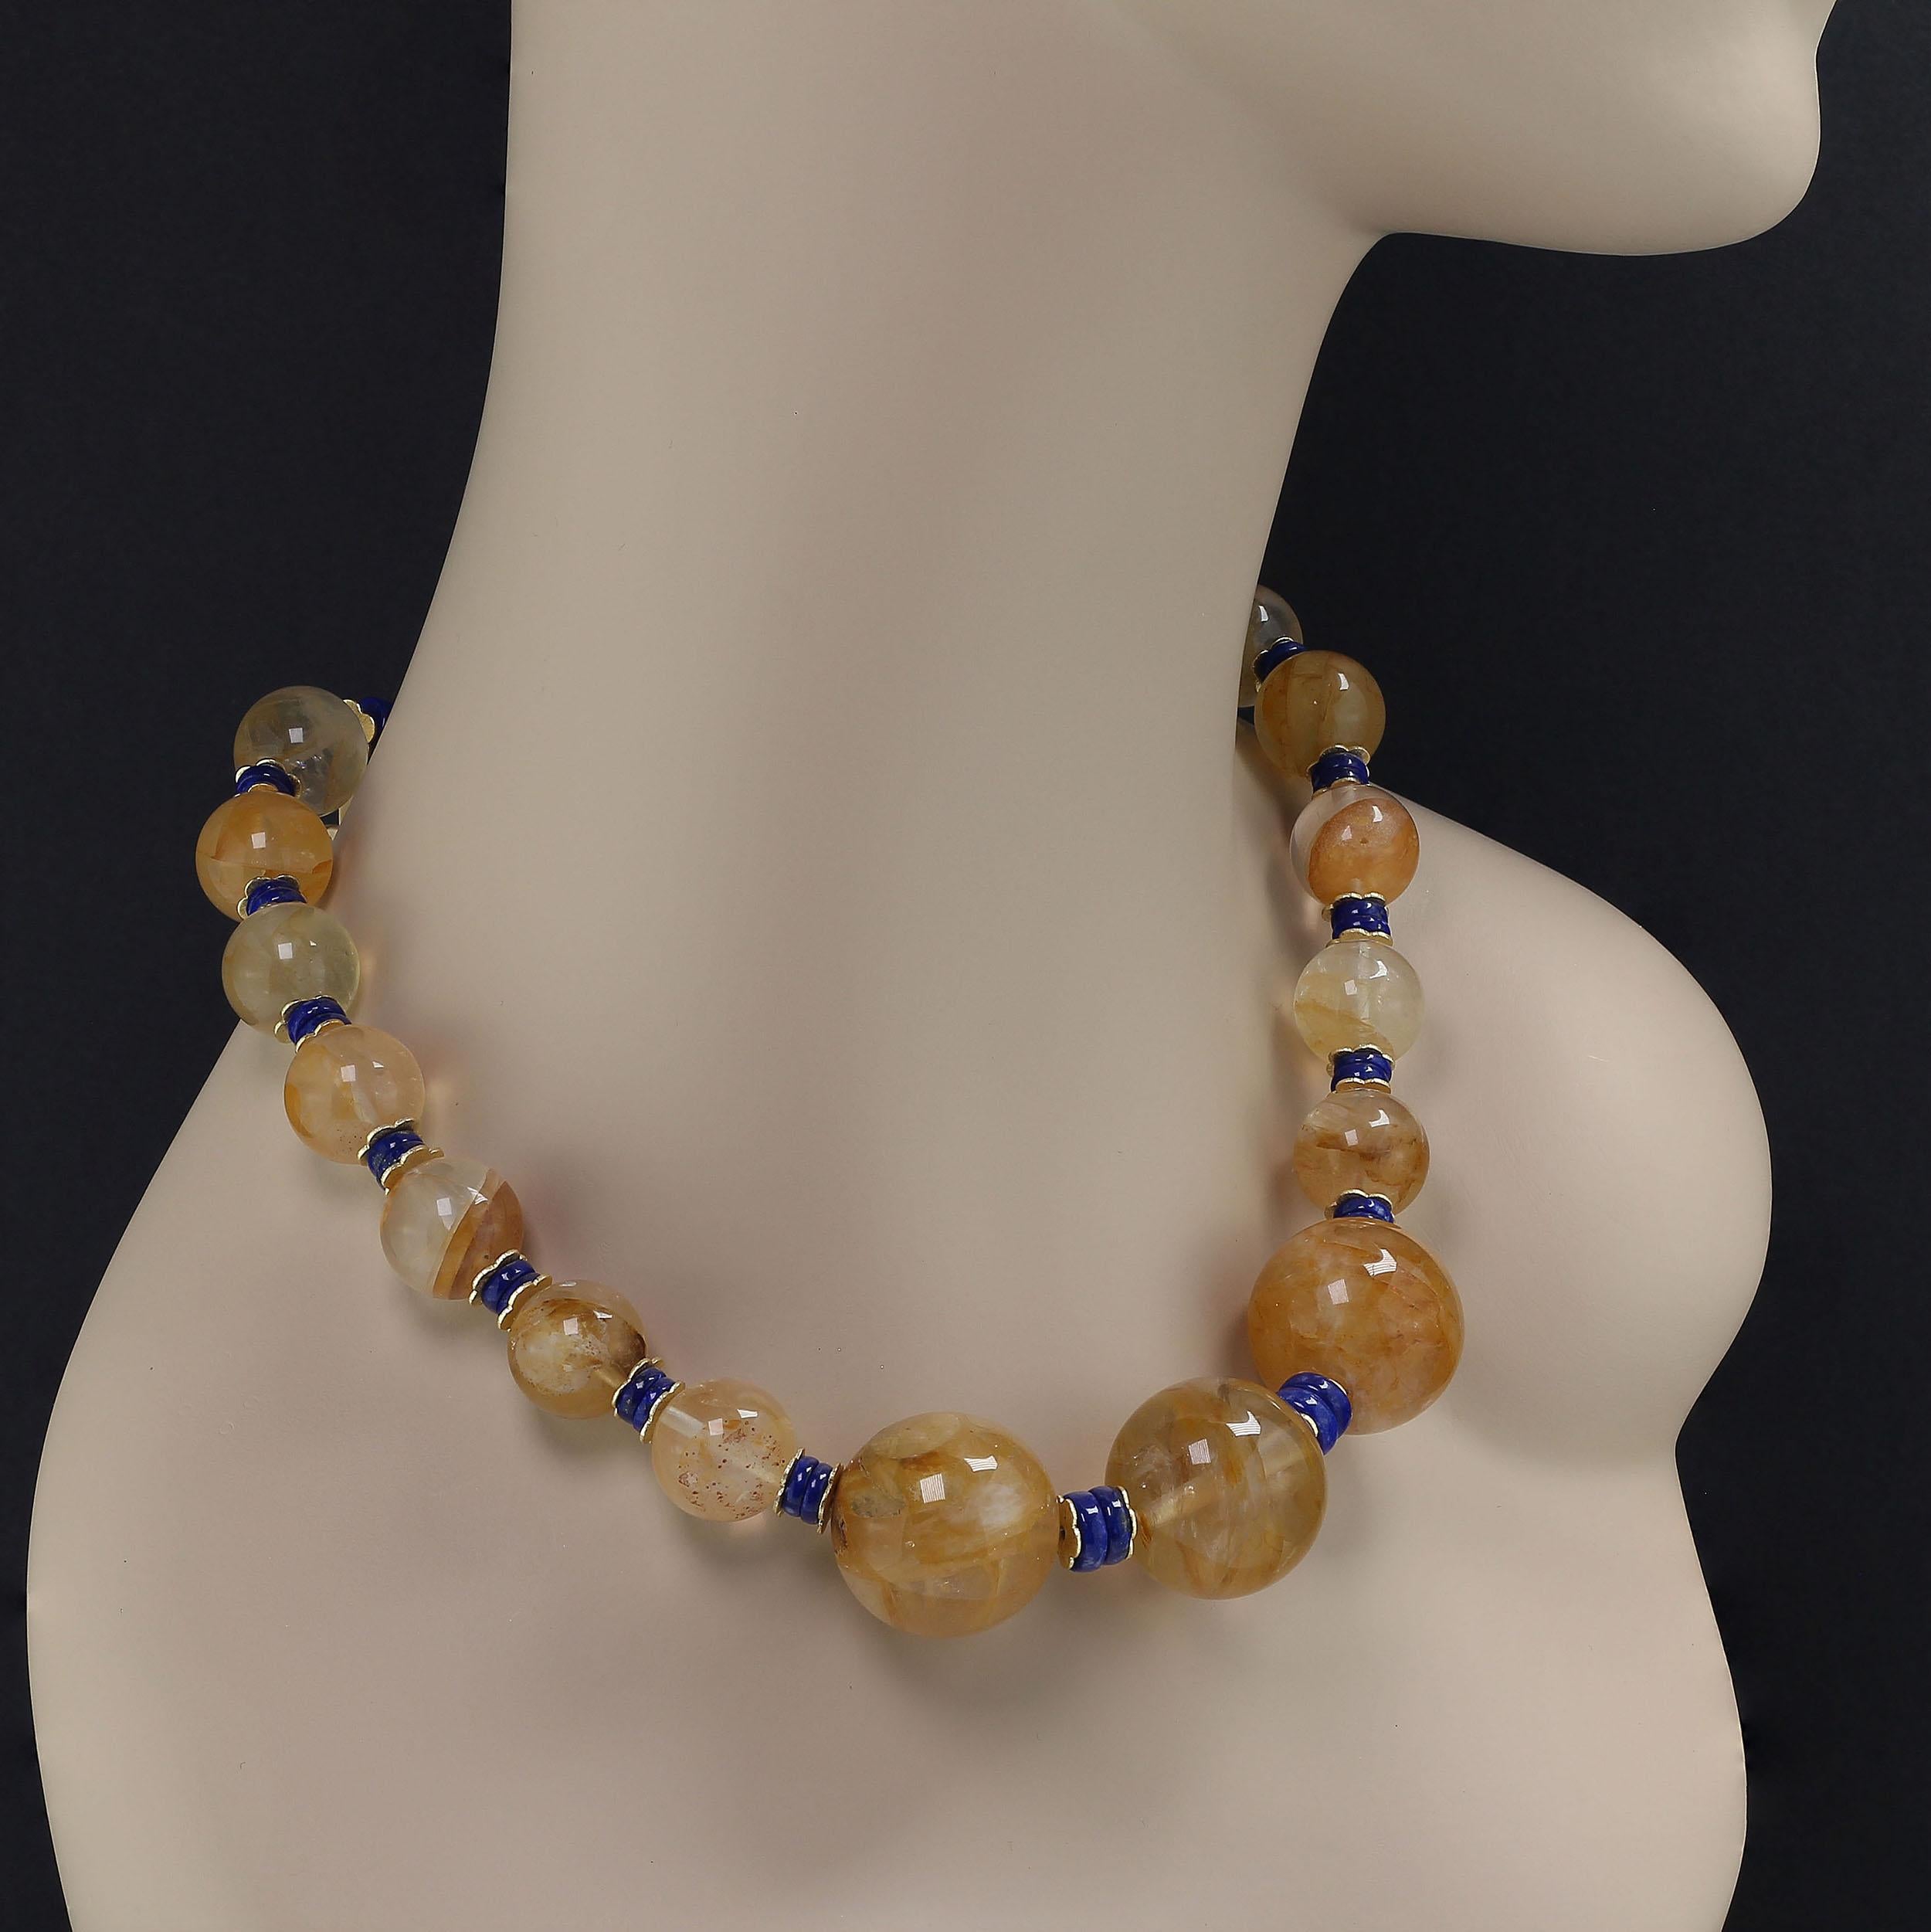 Artisan AJD 20 Inch  Golden Quartz and Lapis Lazuli Necklace  Great Gift!! For Sale